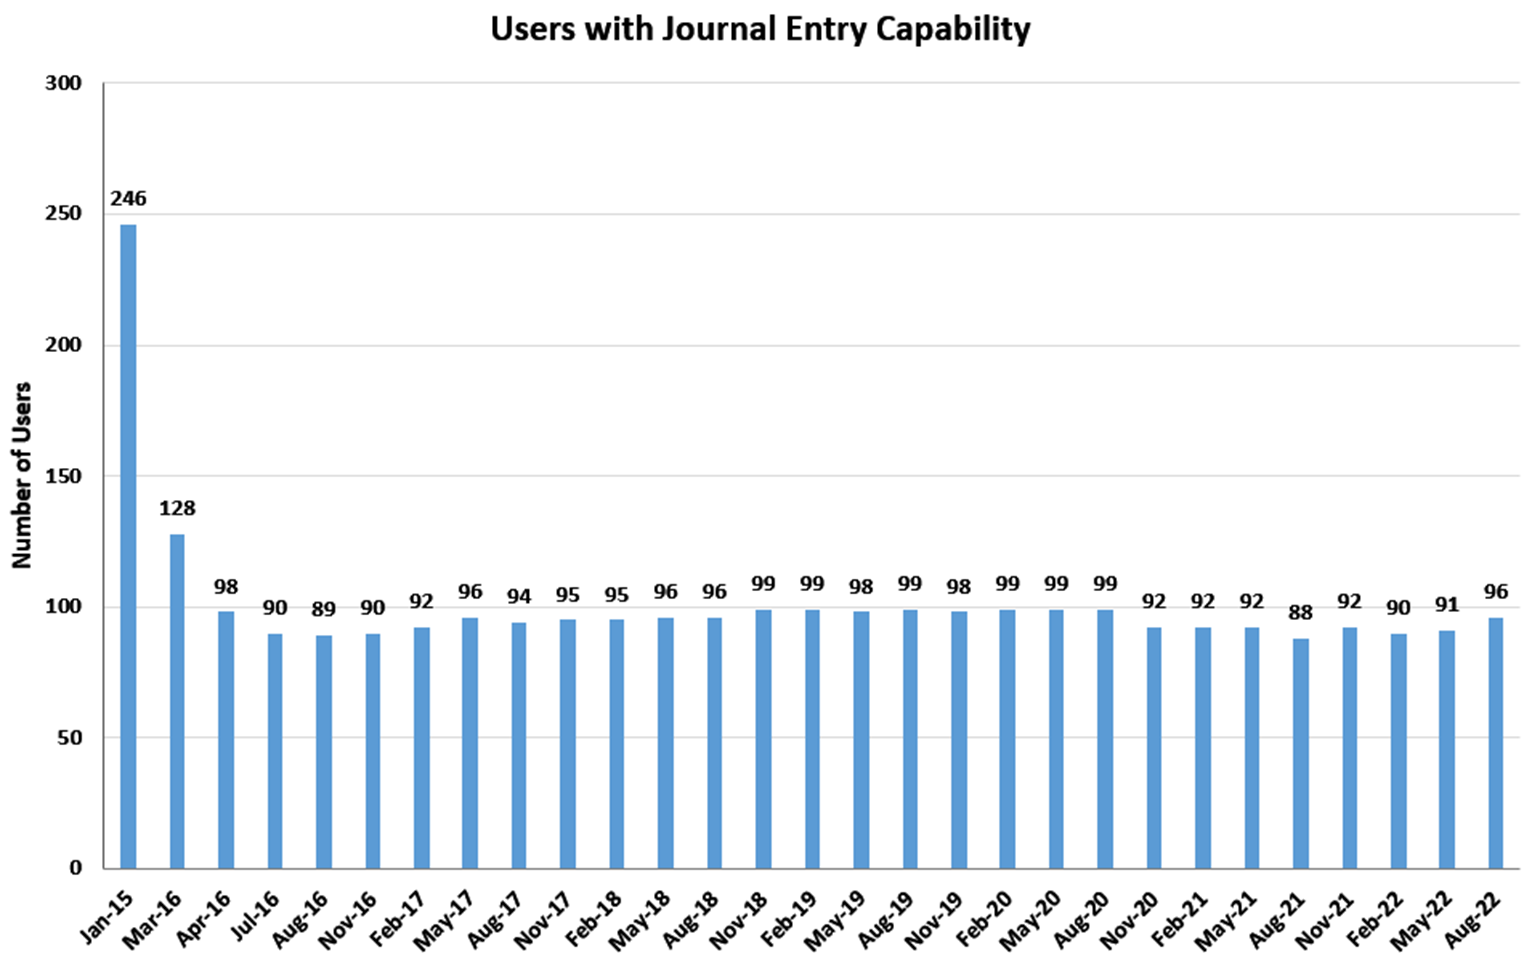 Users with Journal Entry Capability